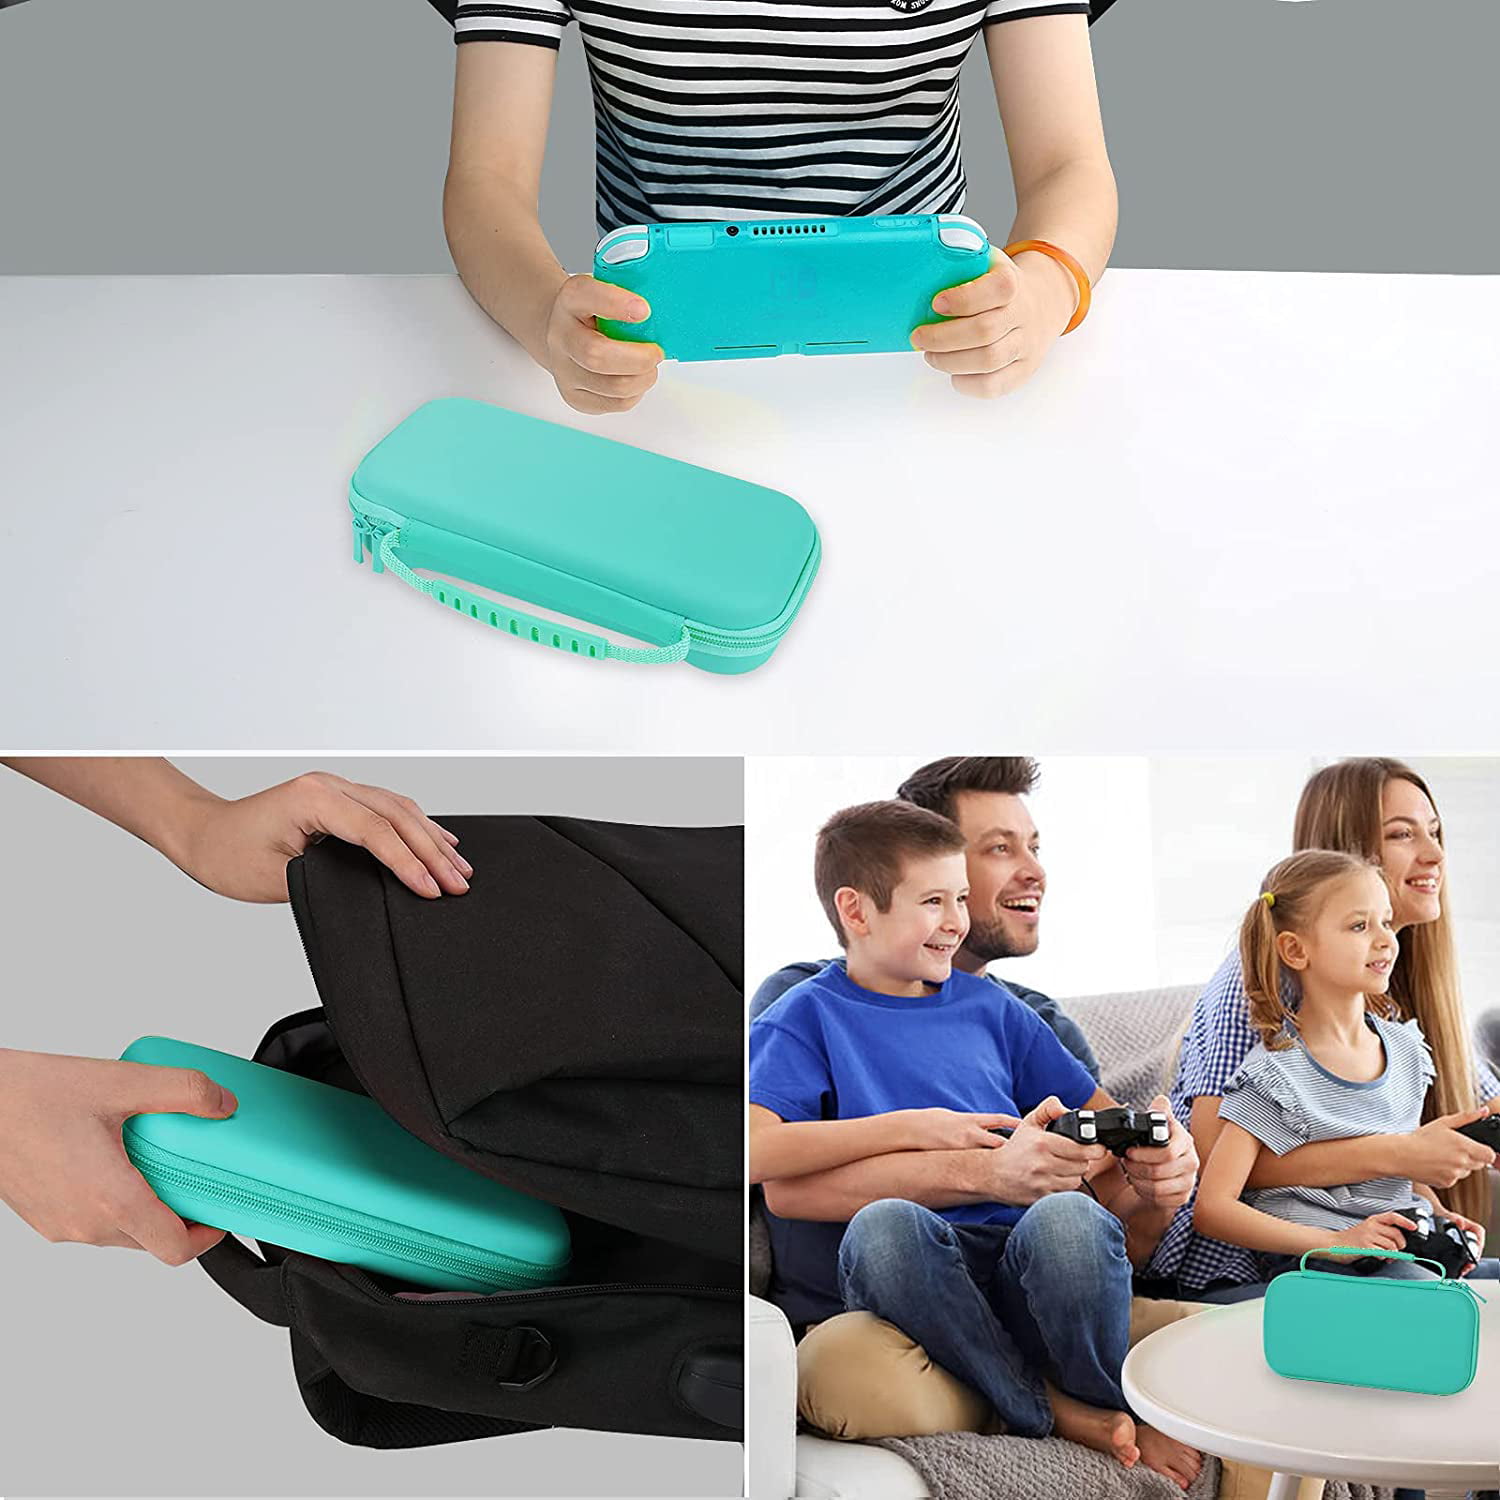 HEYSTOP Compatible with Switch Lite Carrying Case, Switch Lite Case with  Soft TPU Protective Case Games Card 6 Thumb Grip Caps for Nintendo Switch  Lite Accessories Kit(Turquoise) 